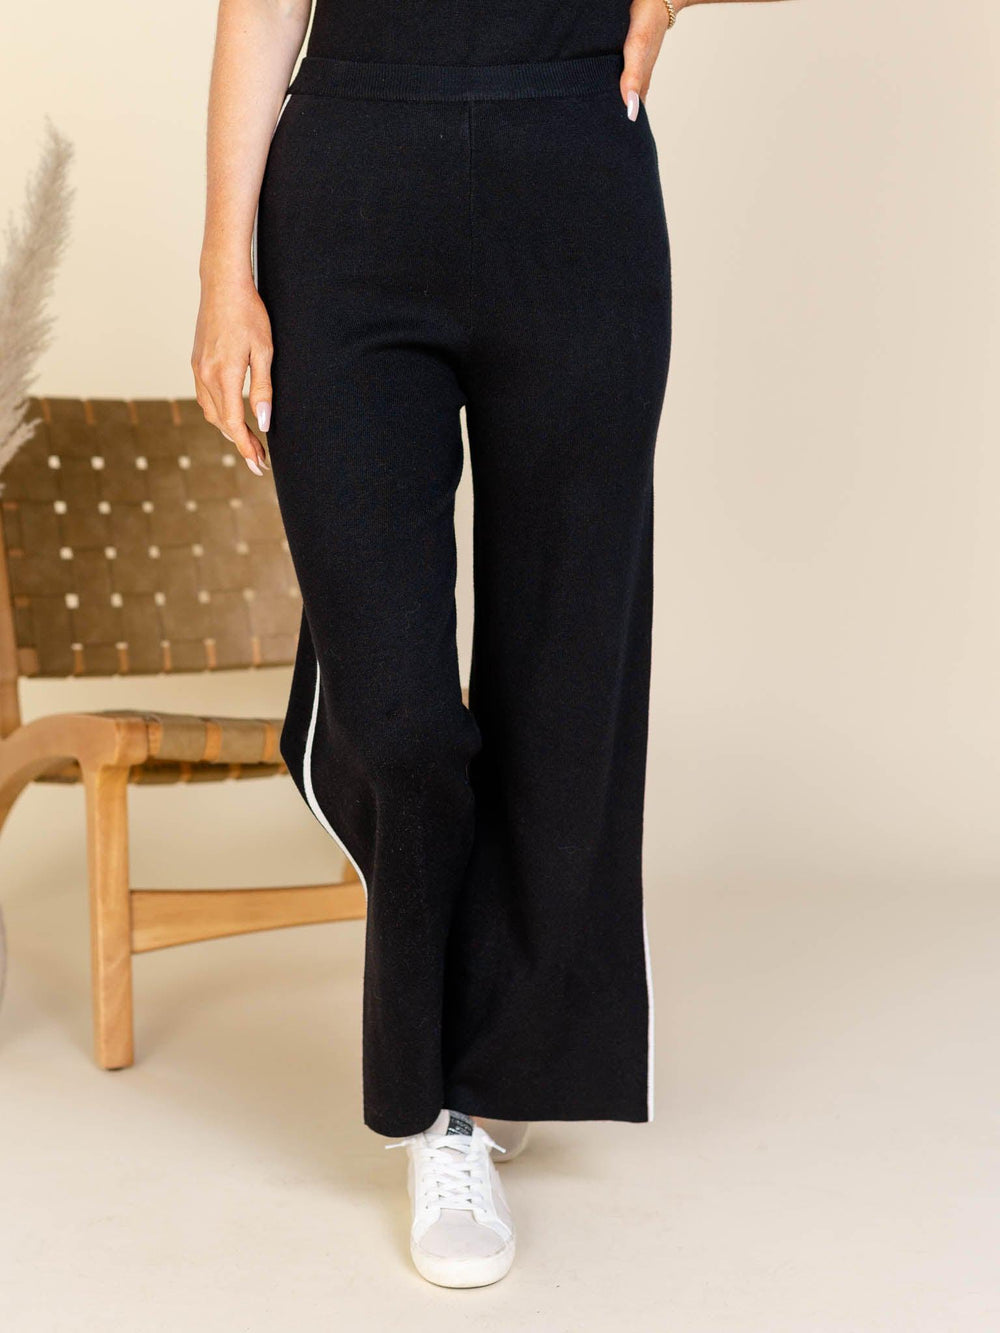 Crescent-Zoey Contrast Soft Pant - Leela and Lavender